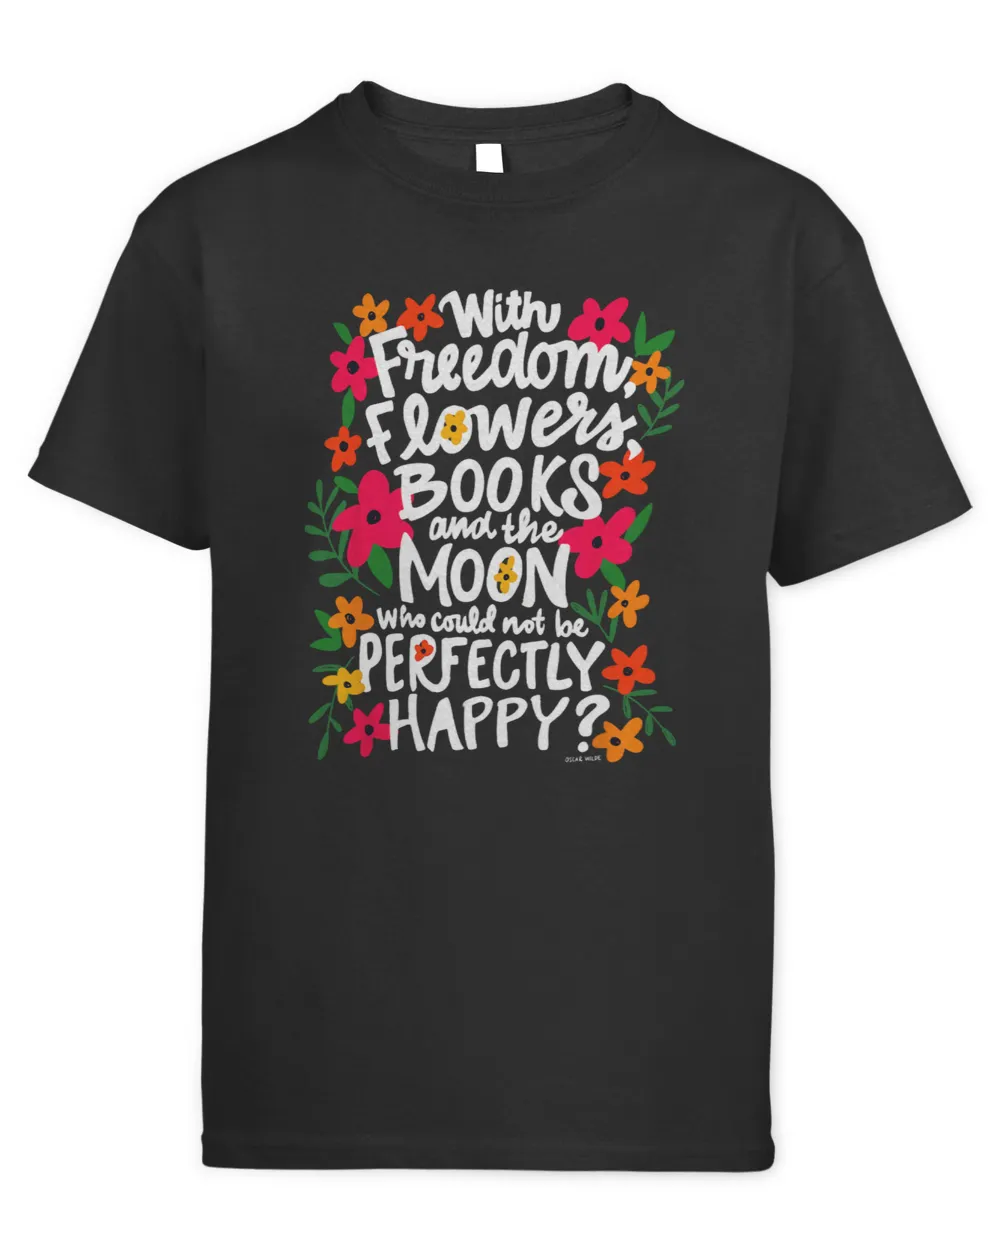 Books Flowers moon Happiness Popular reading quote